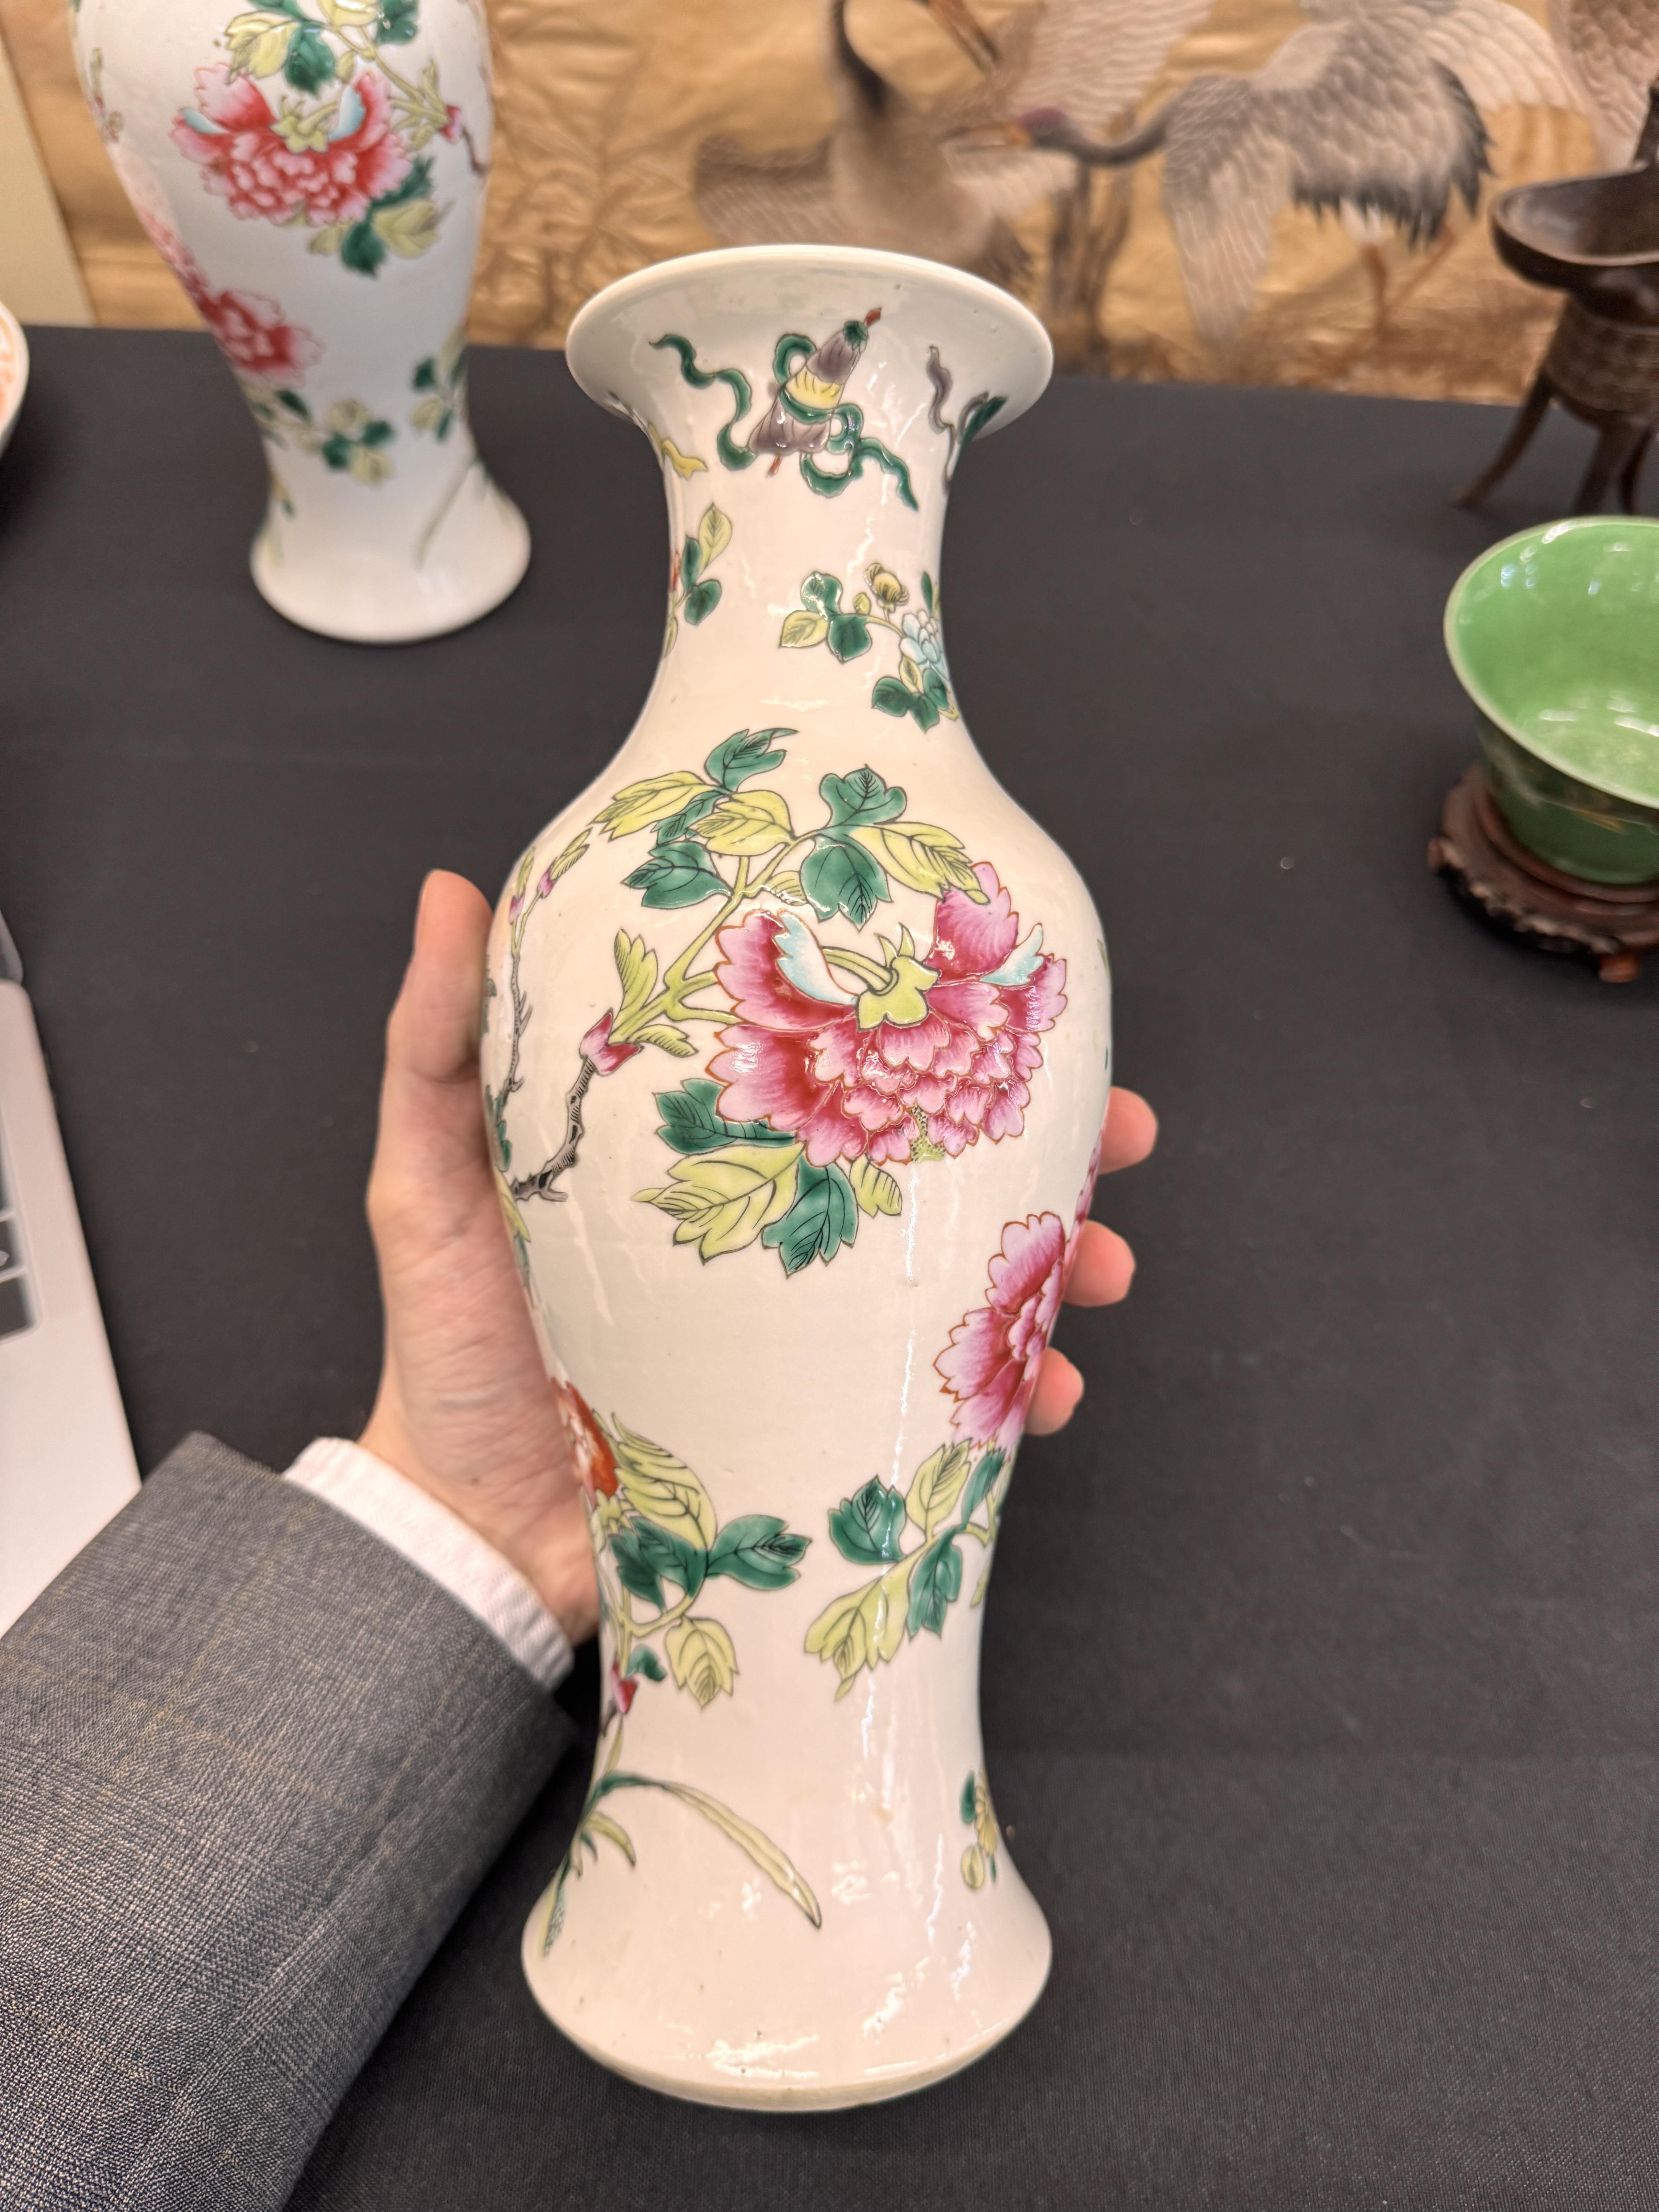 A PAIR OF CHINESE FAMILLE-ROSE 'PEONY' VASES 清 十九或二十世紀 粉彩牡丹紋瓶一對 - Image 11 of 19